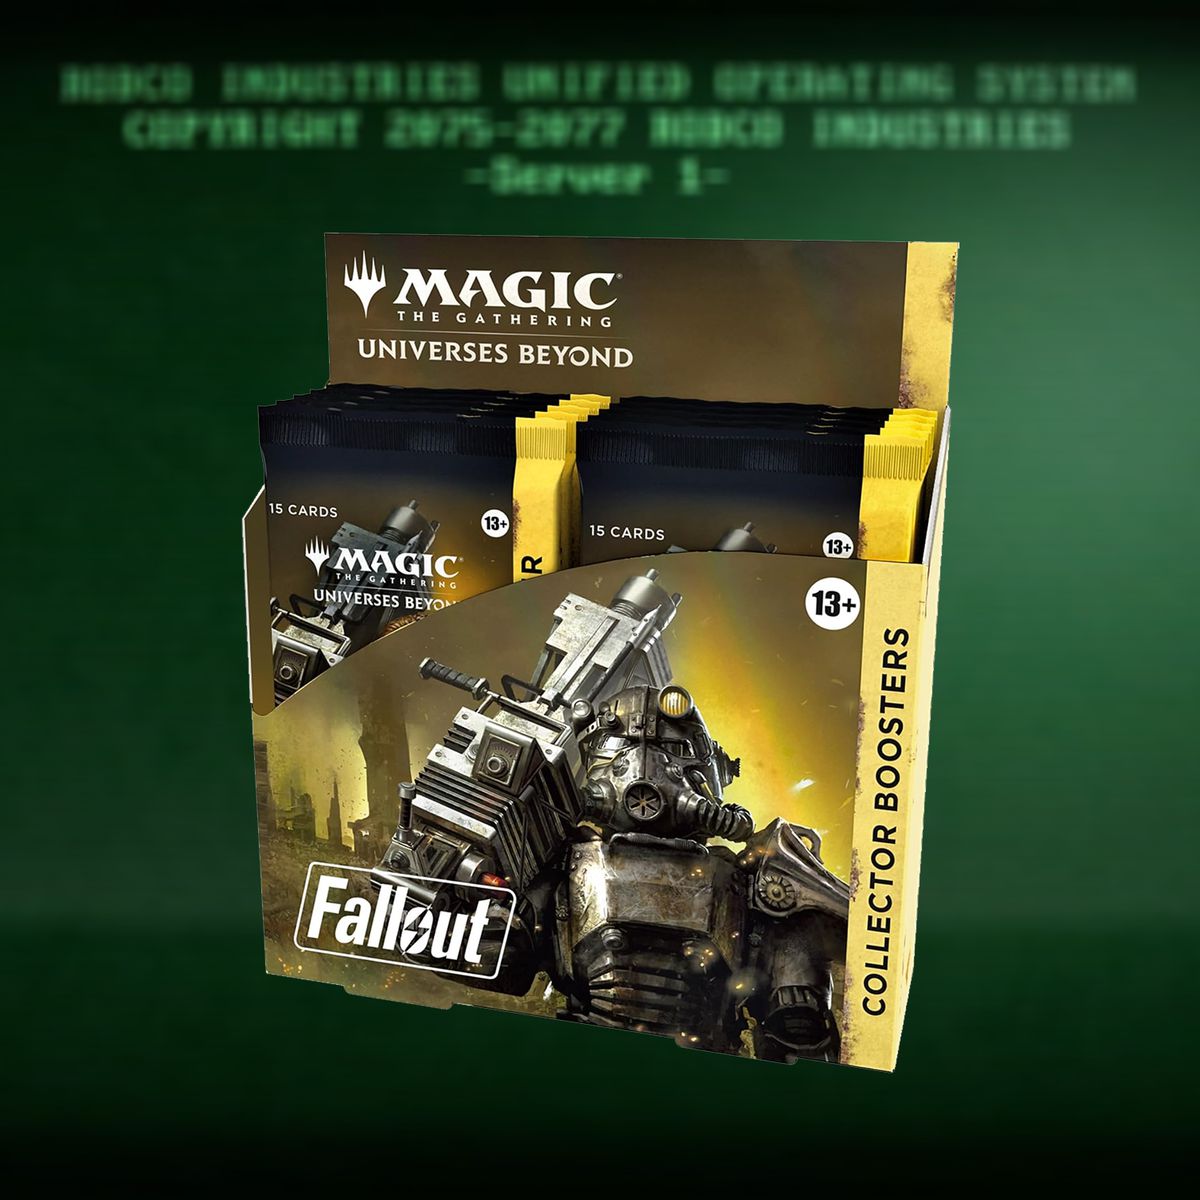 1708456356 403 Magics Fallout Commander set will destroy your land with the